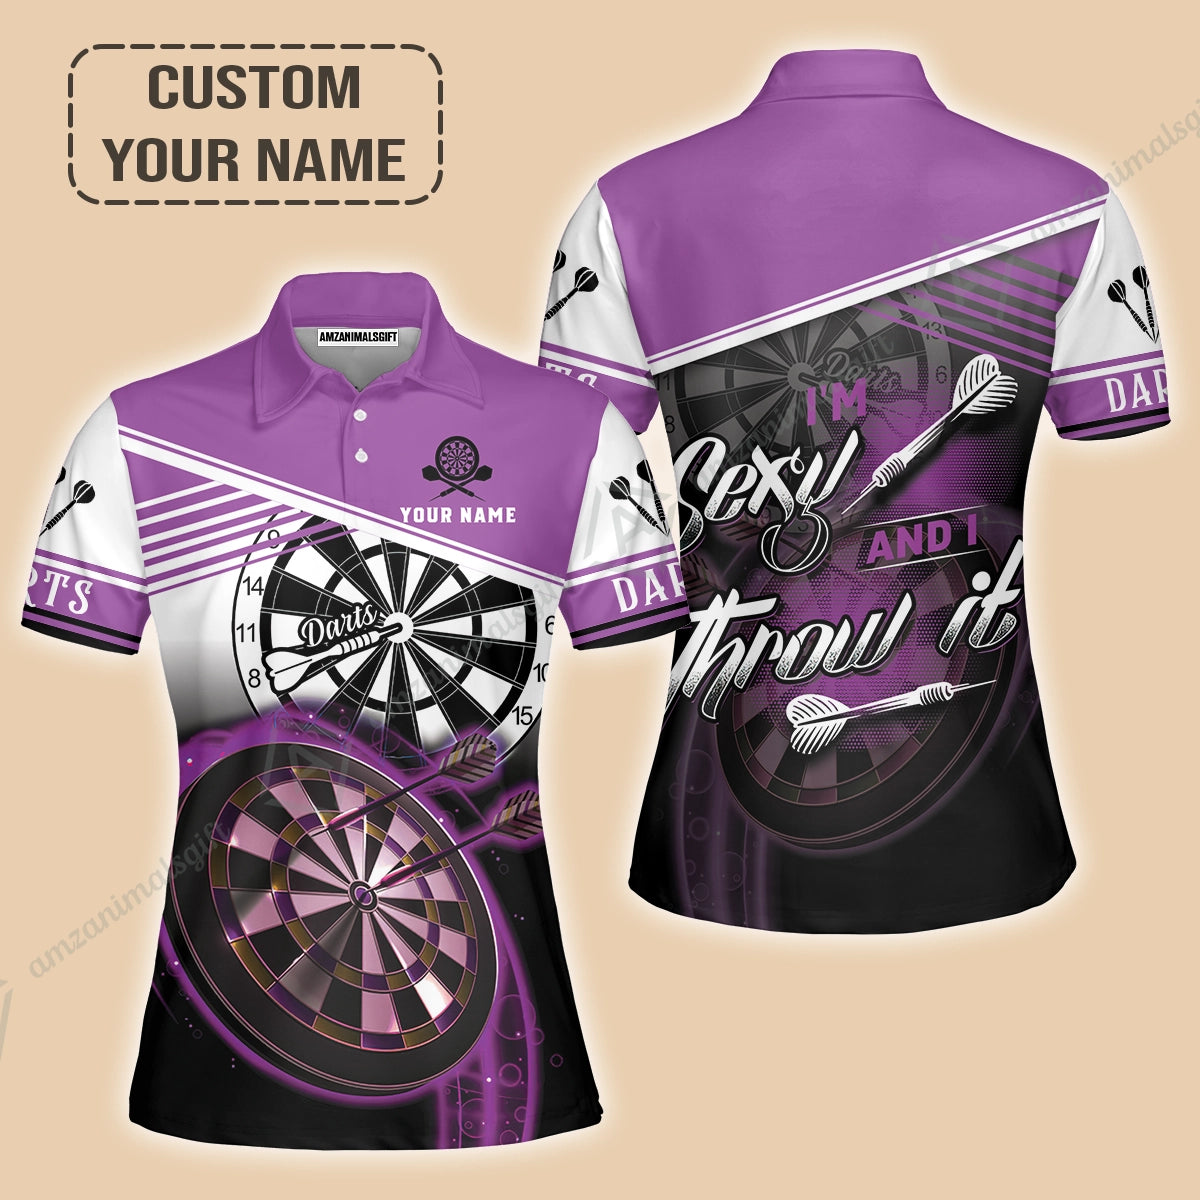 Personalized Darts Women Polo Shirt, Darts Purple Color Customized Polo Shirt I'm Sexy And I Throw It, Outfits For Darts Players, Darts Team